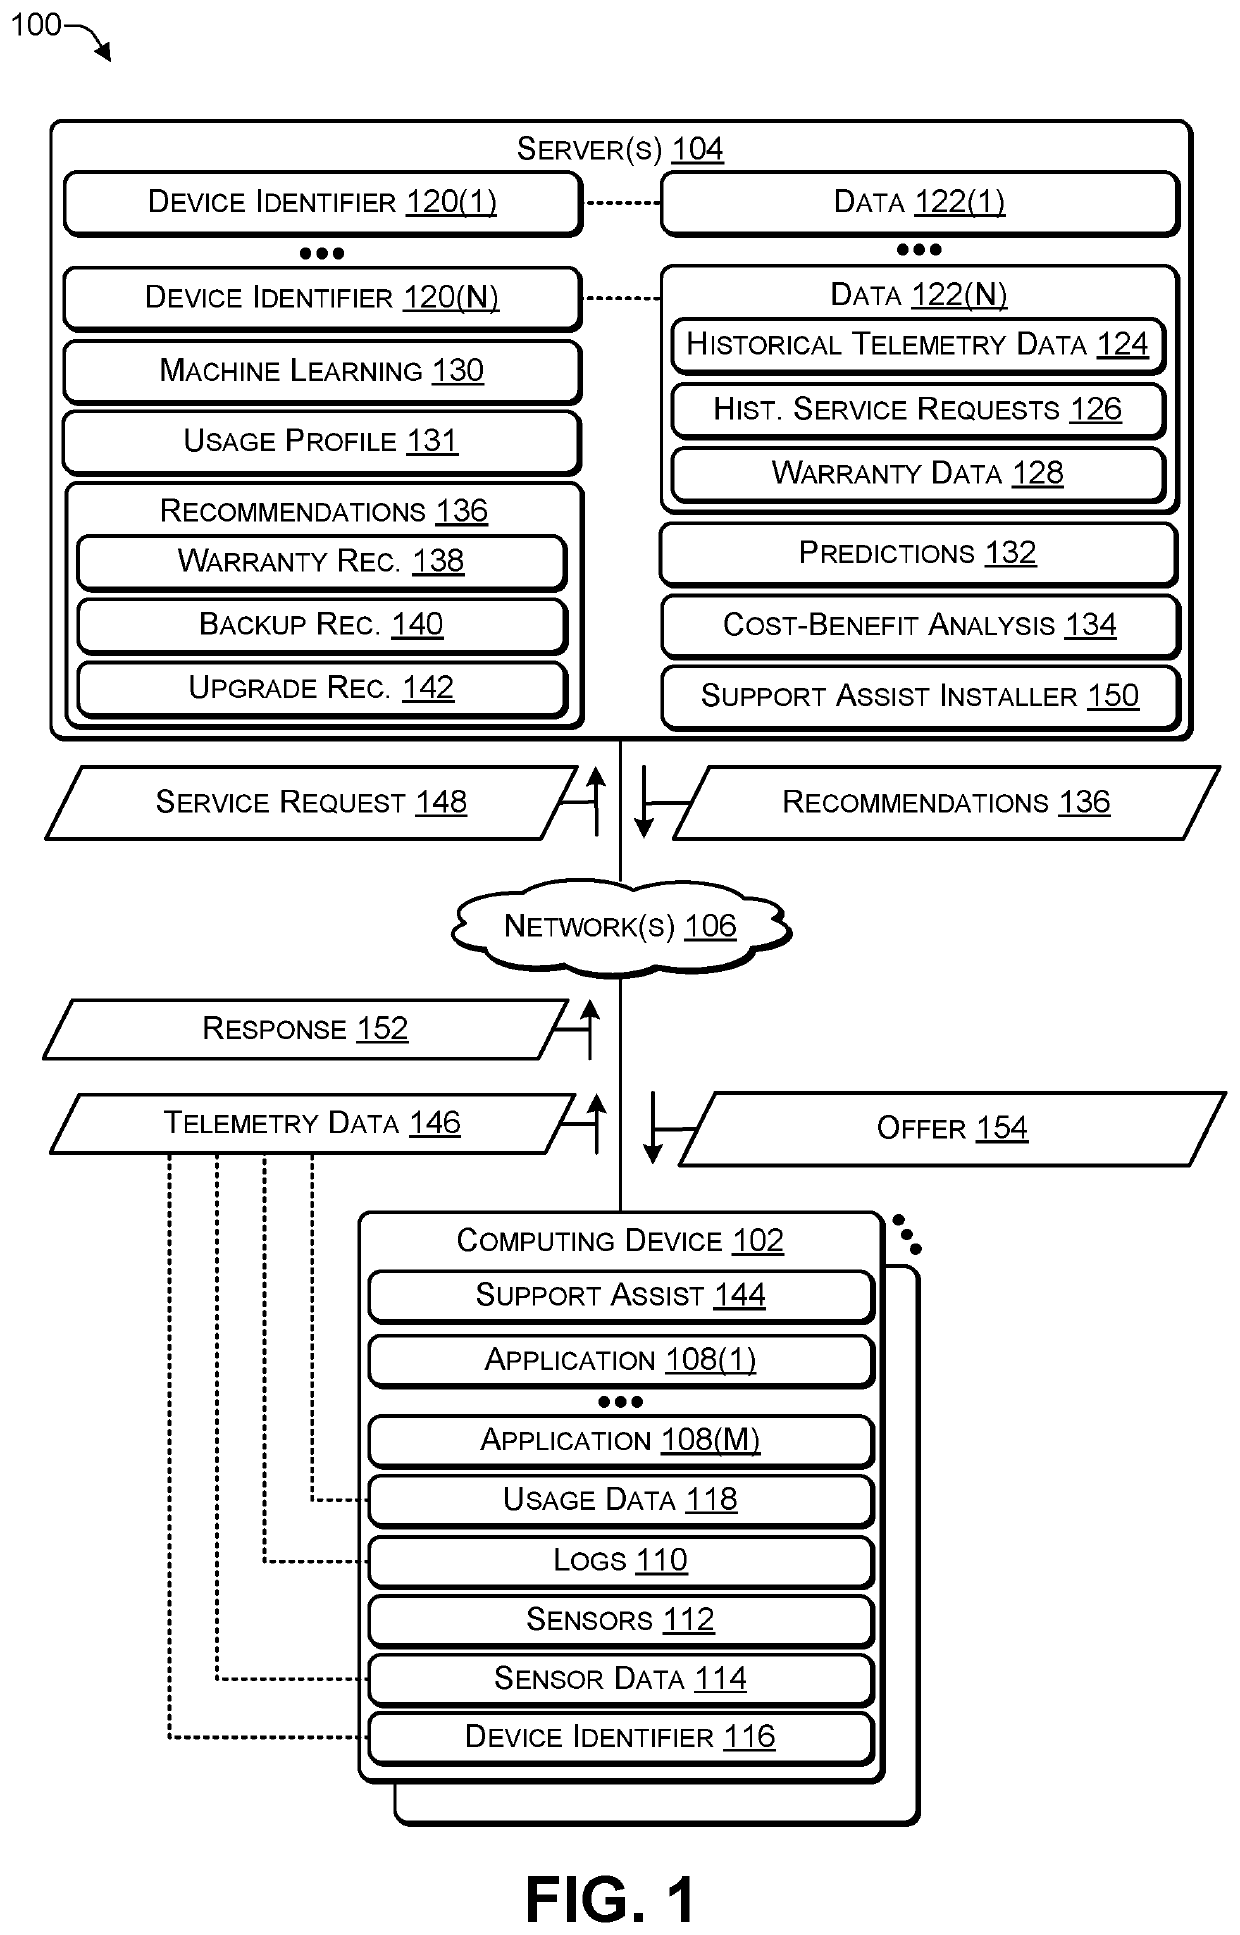 Using machine learning to predict a usage profile and recommendations associated with a computing device